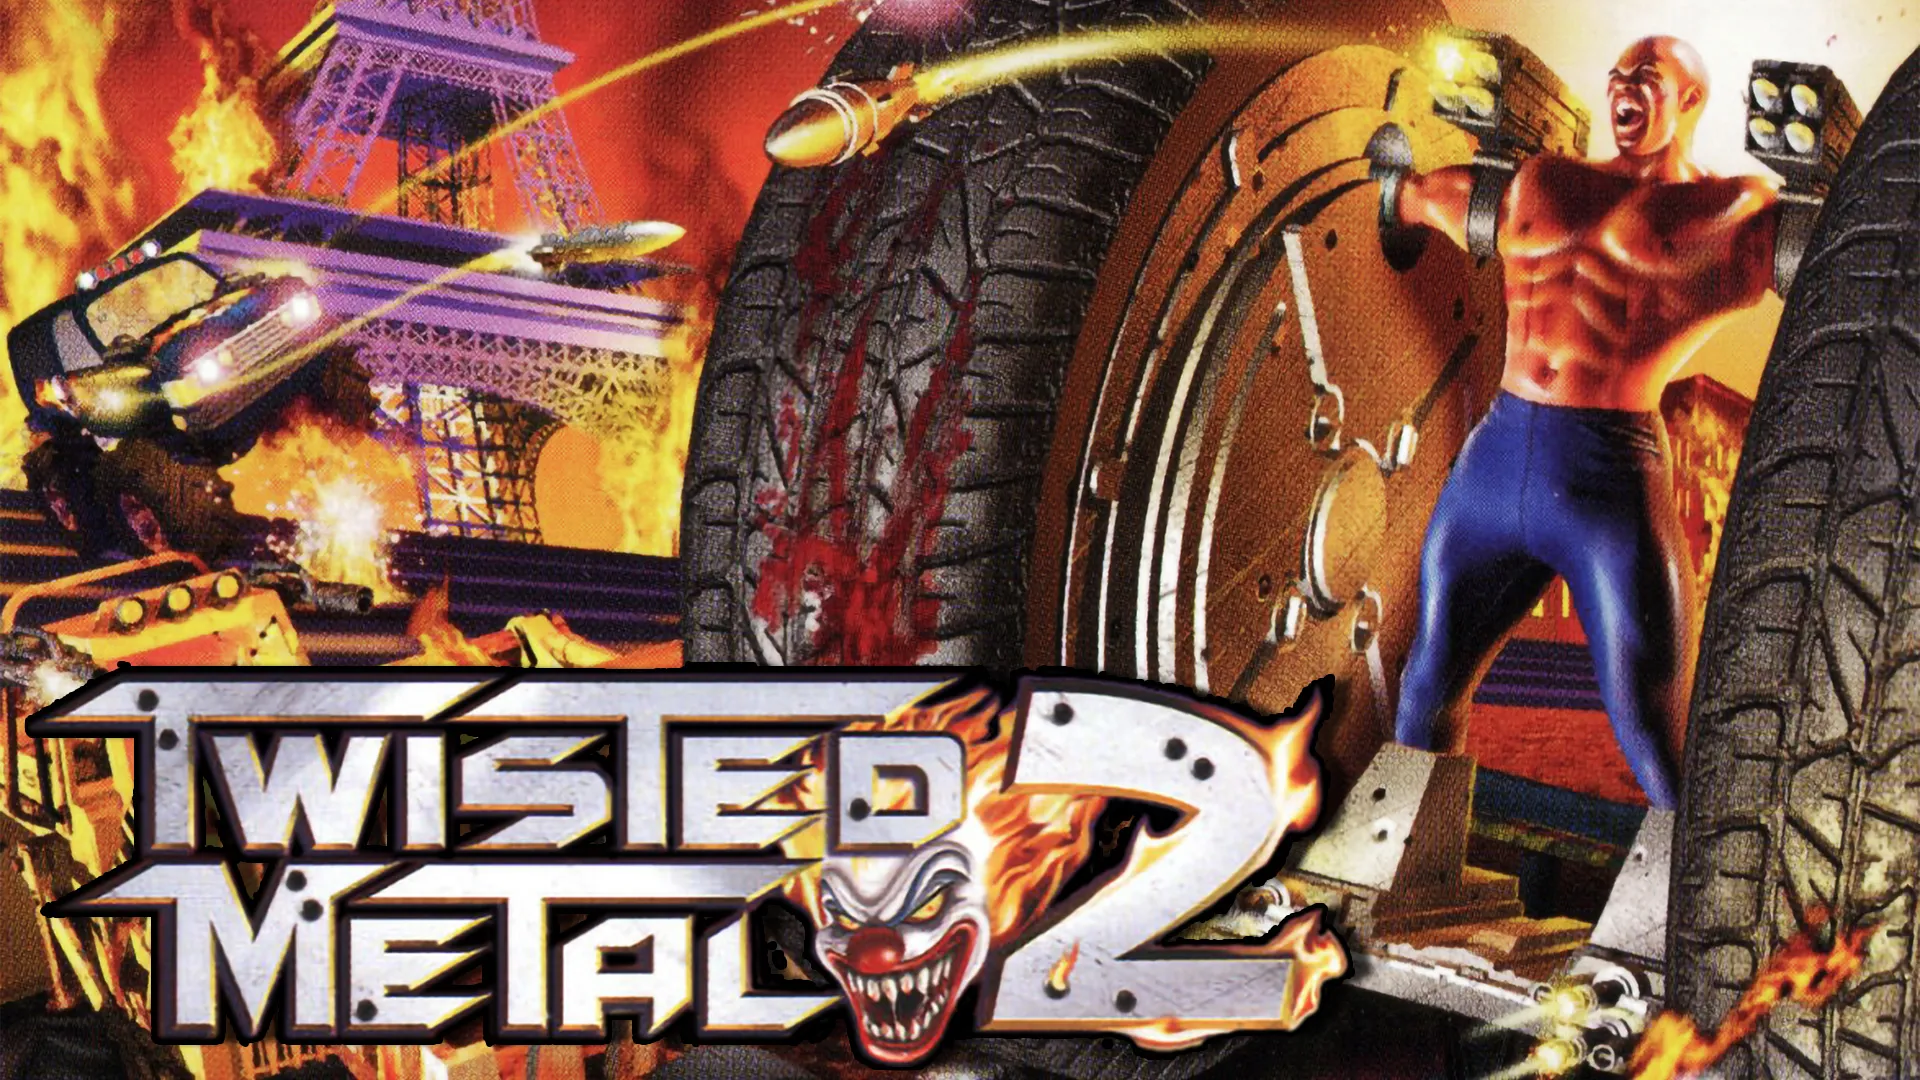 Twisted Metal reboot could include on-foot combat and VR functionality